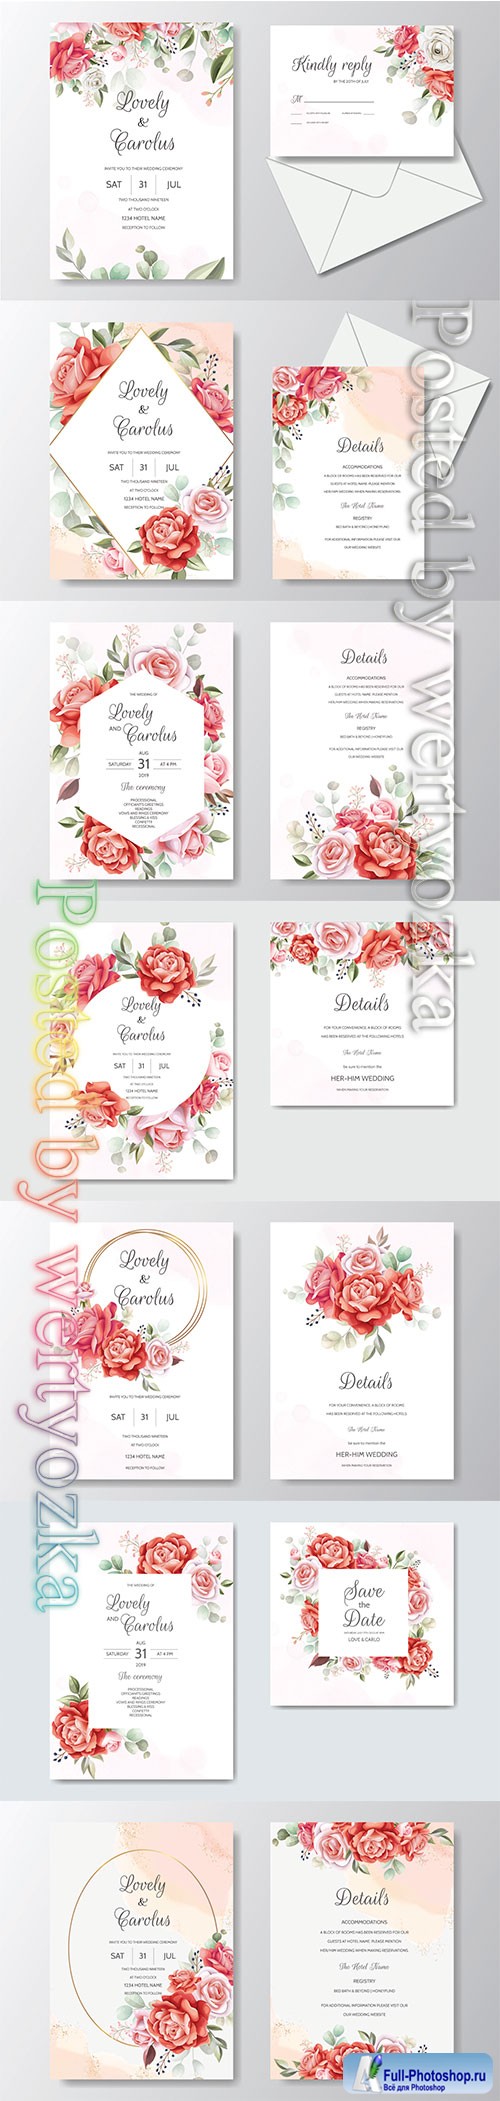 Wedding invitations with beautiful flowers and sophisticated design